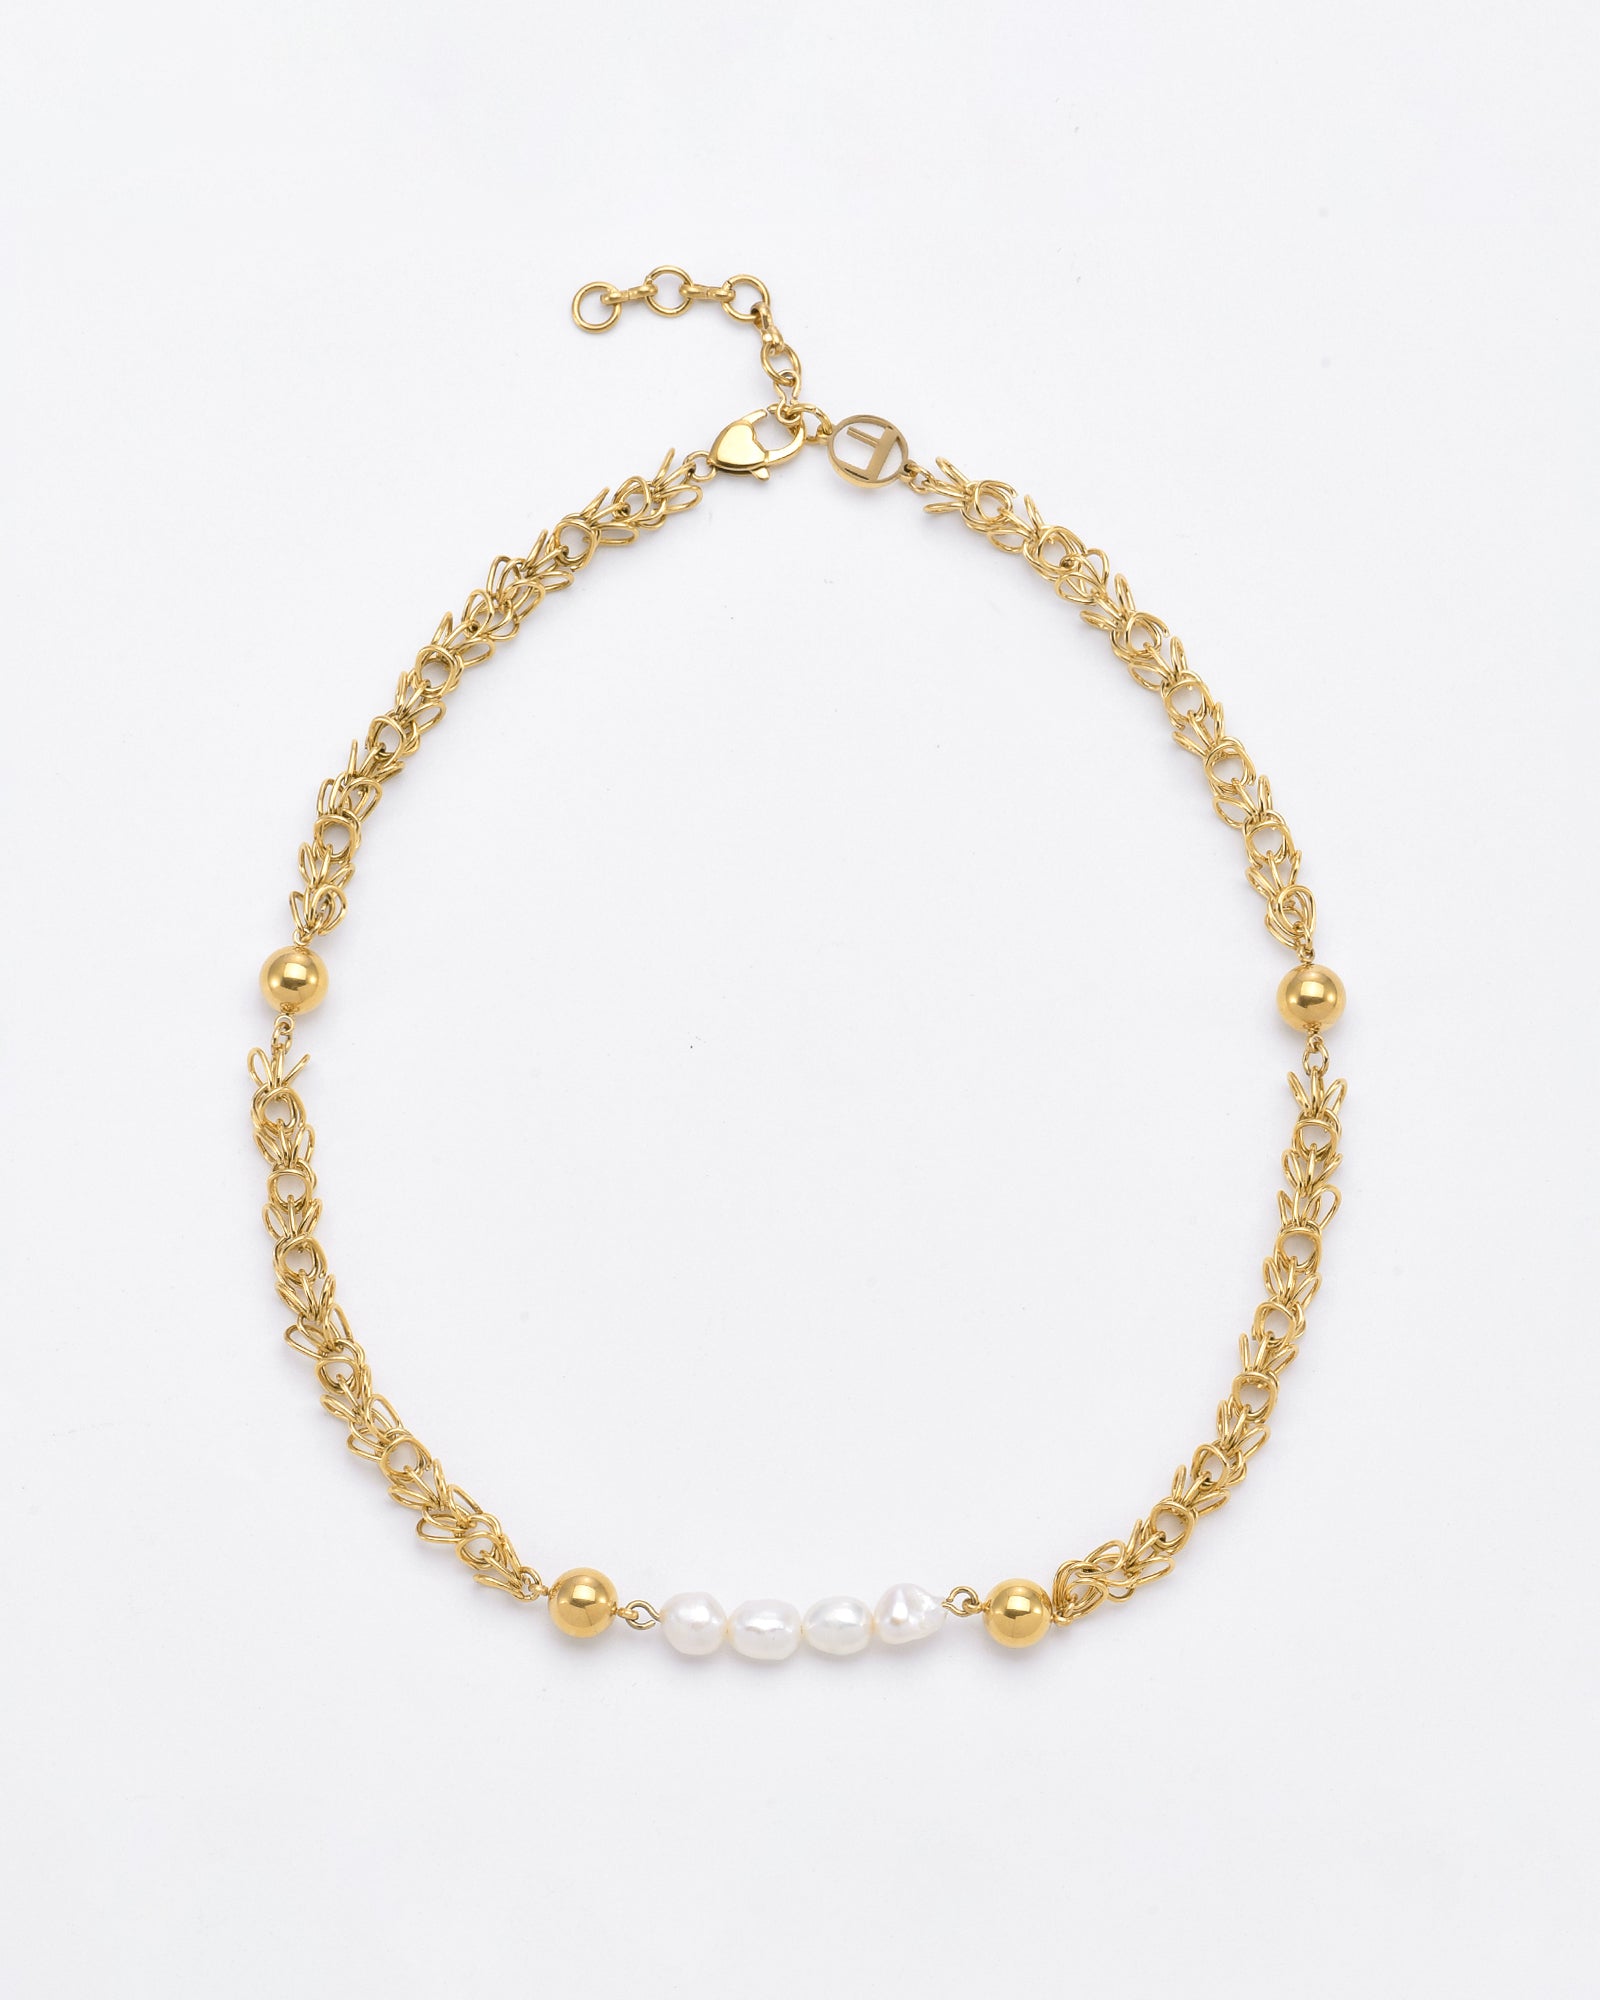 The For Art&#39;s Sake® Athena Necklace Gold is a delicate gold chain with an intricate leaf-like design, featuring alternating 24-karat gold plated beads and freshwater pearls at the center. It has an adjustable clasp closure against a plain white background.